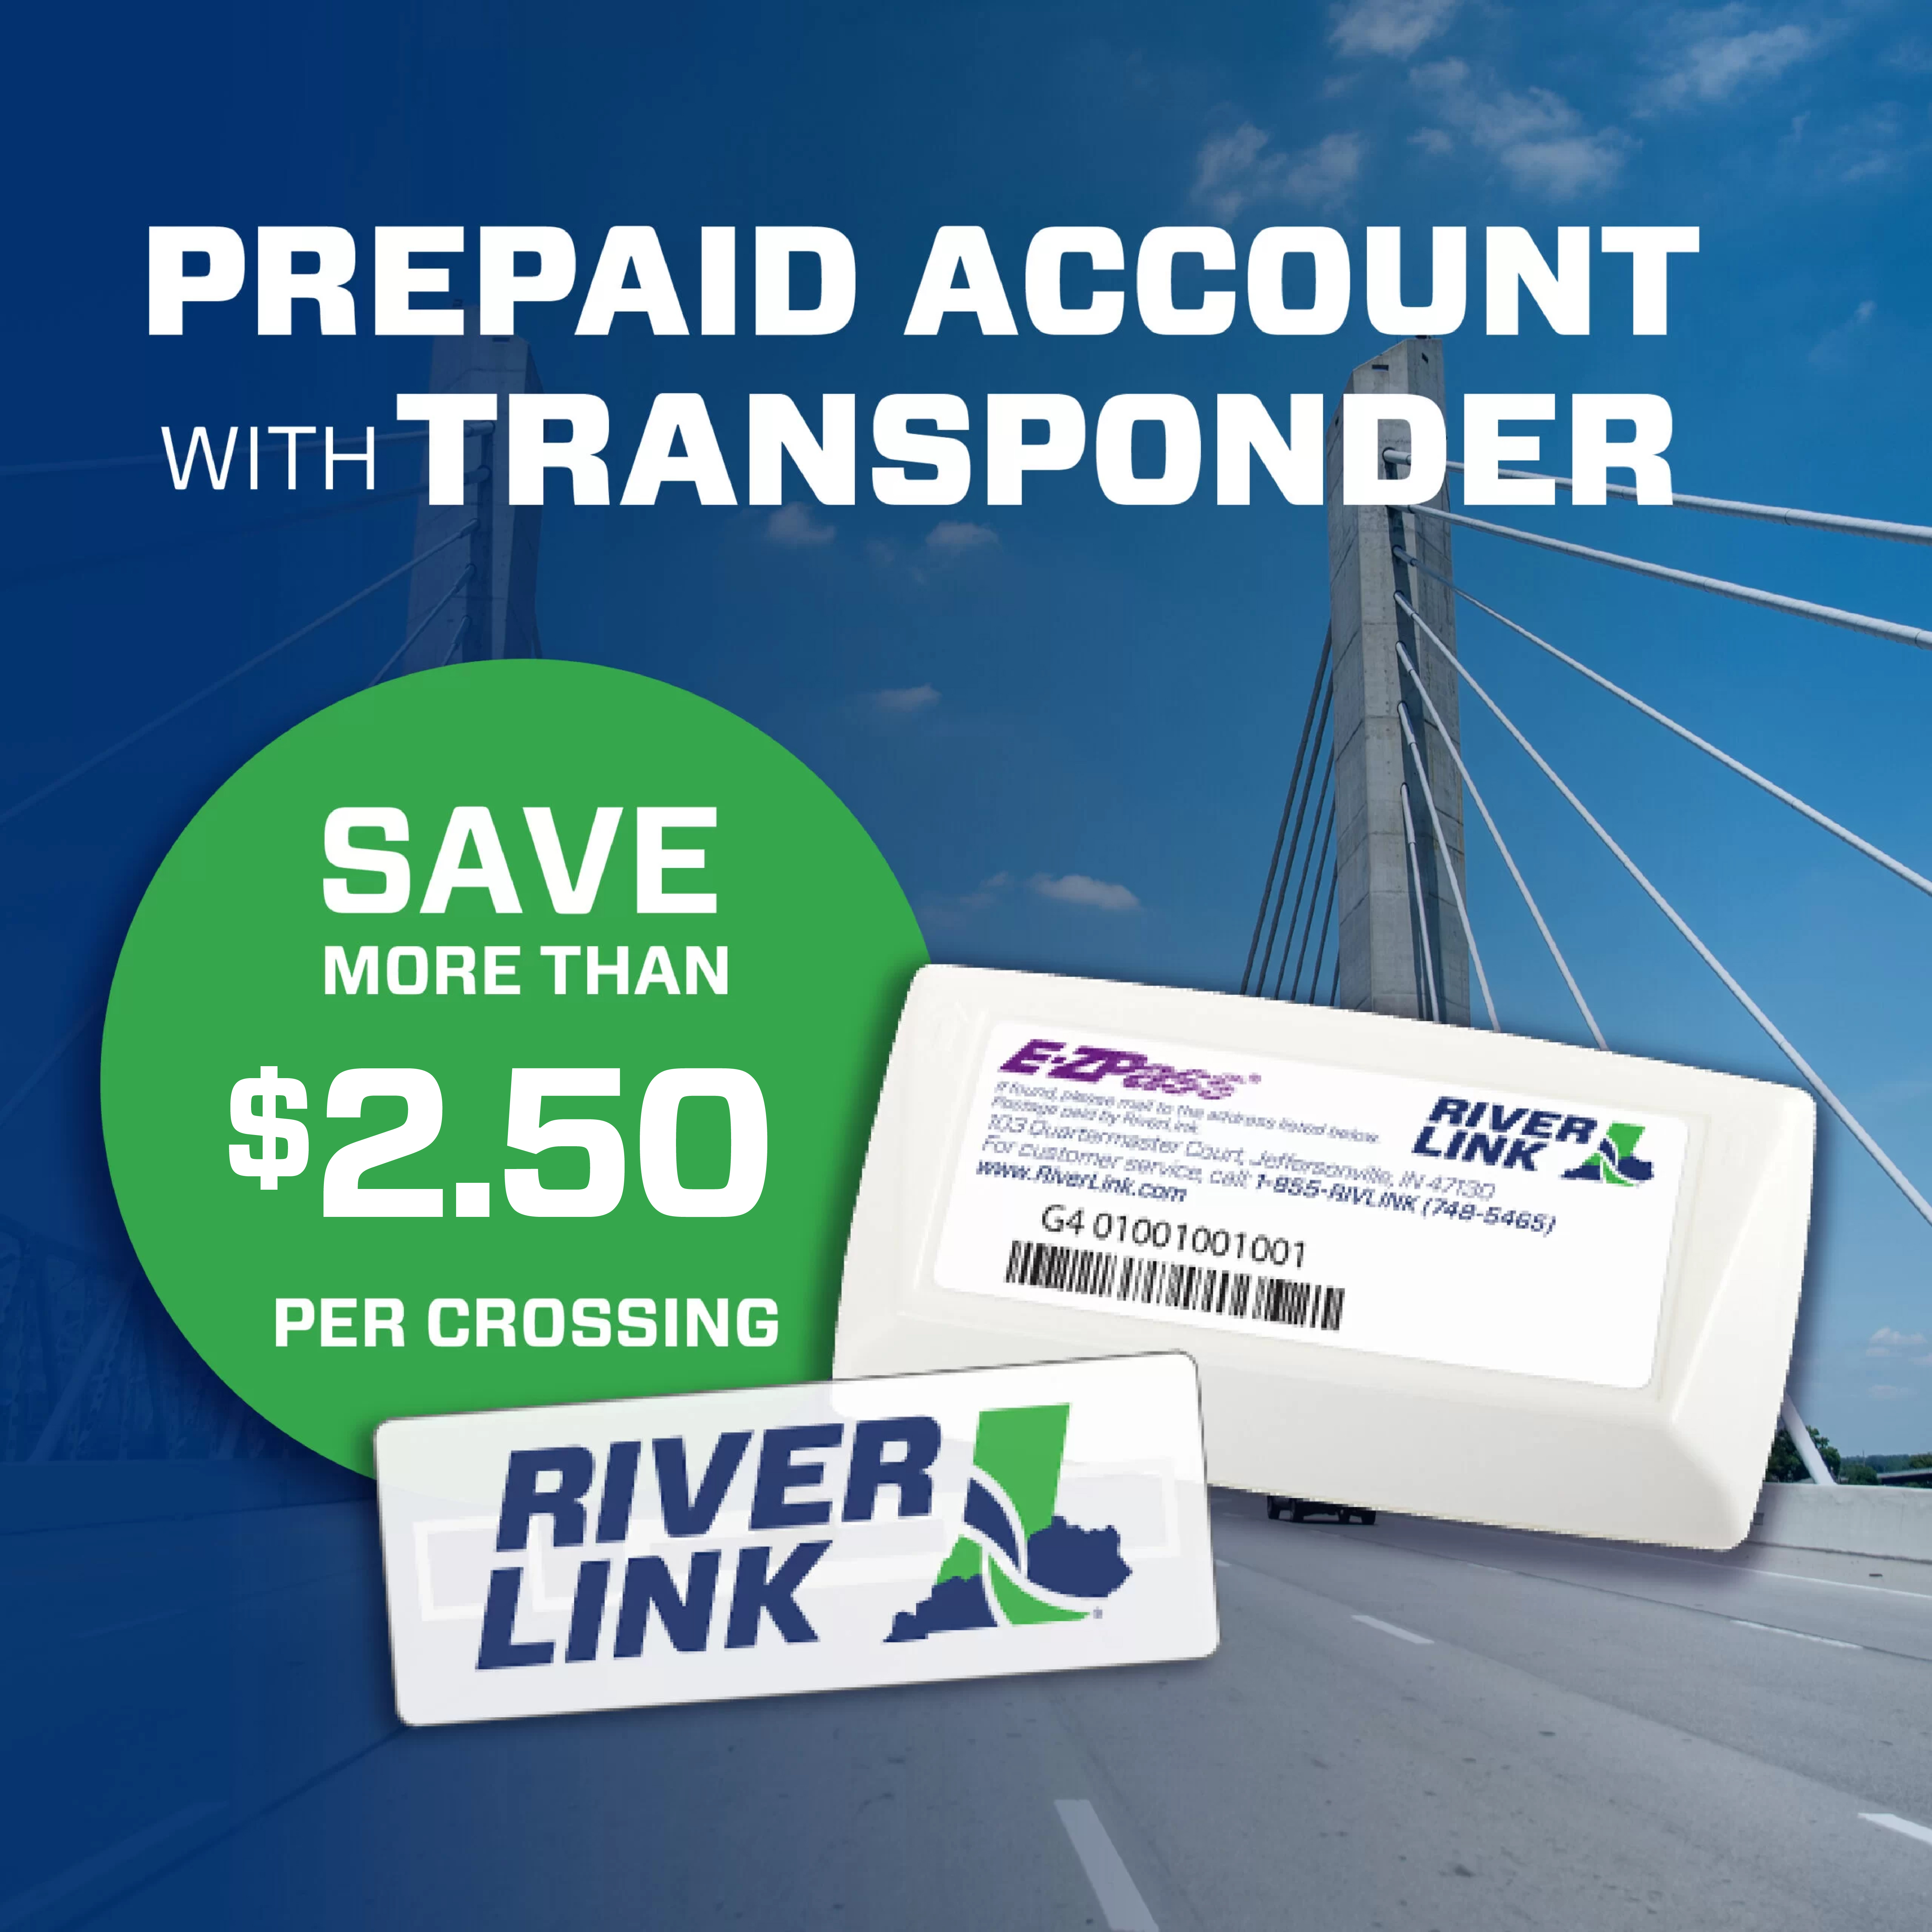 Prepaid account with transponder. Save more than $2.50 per crossing